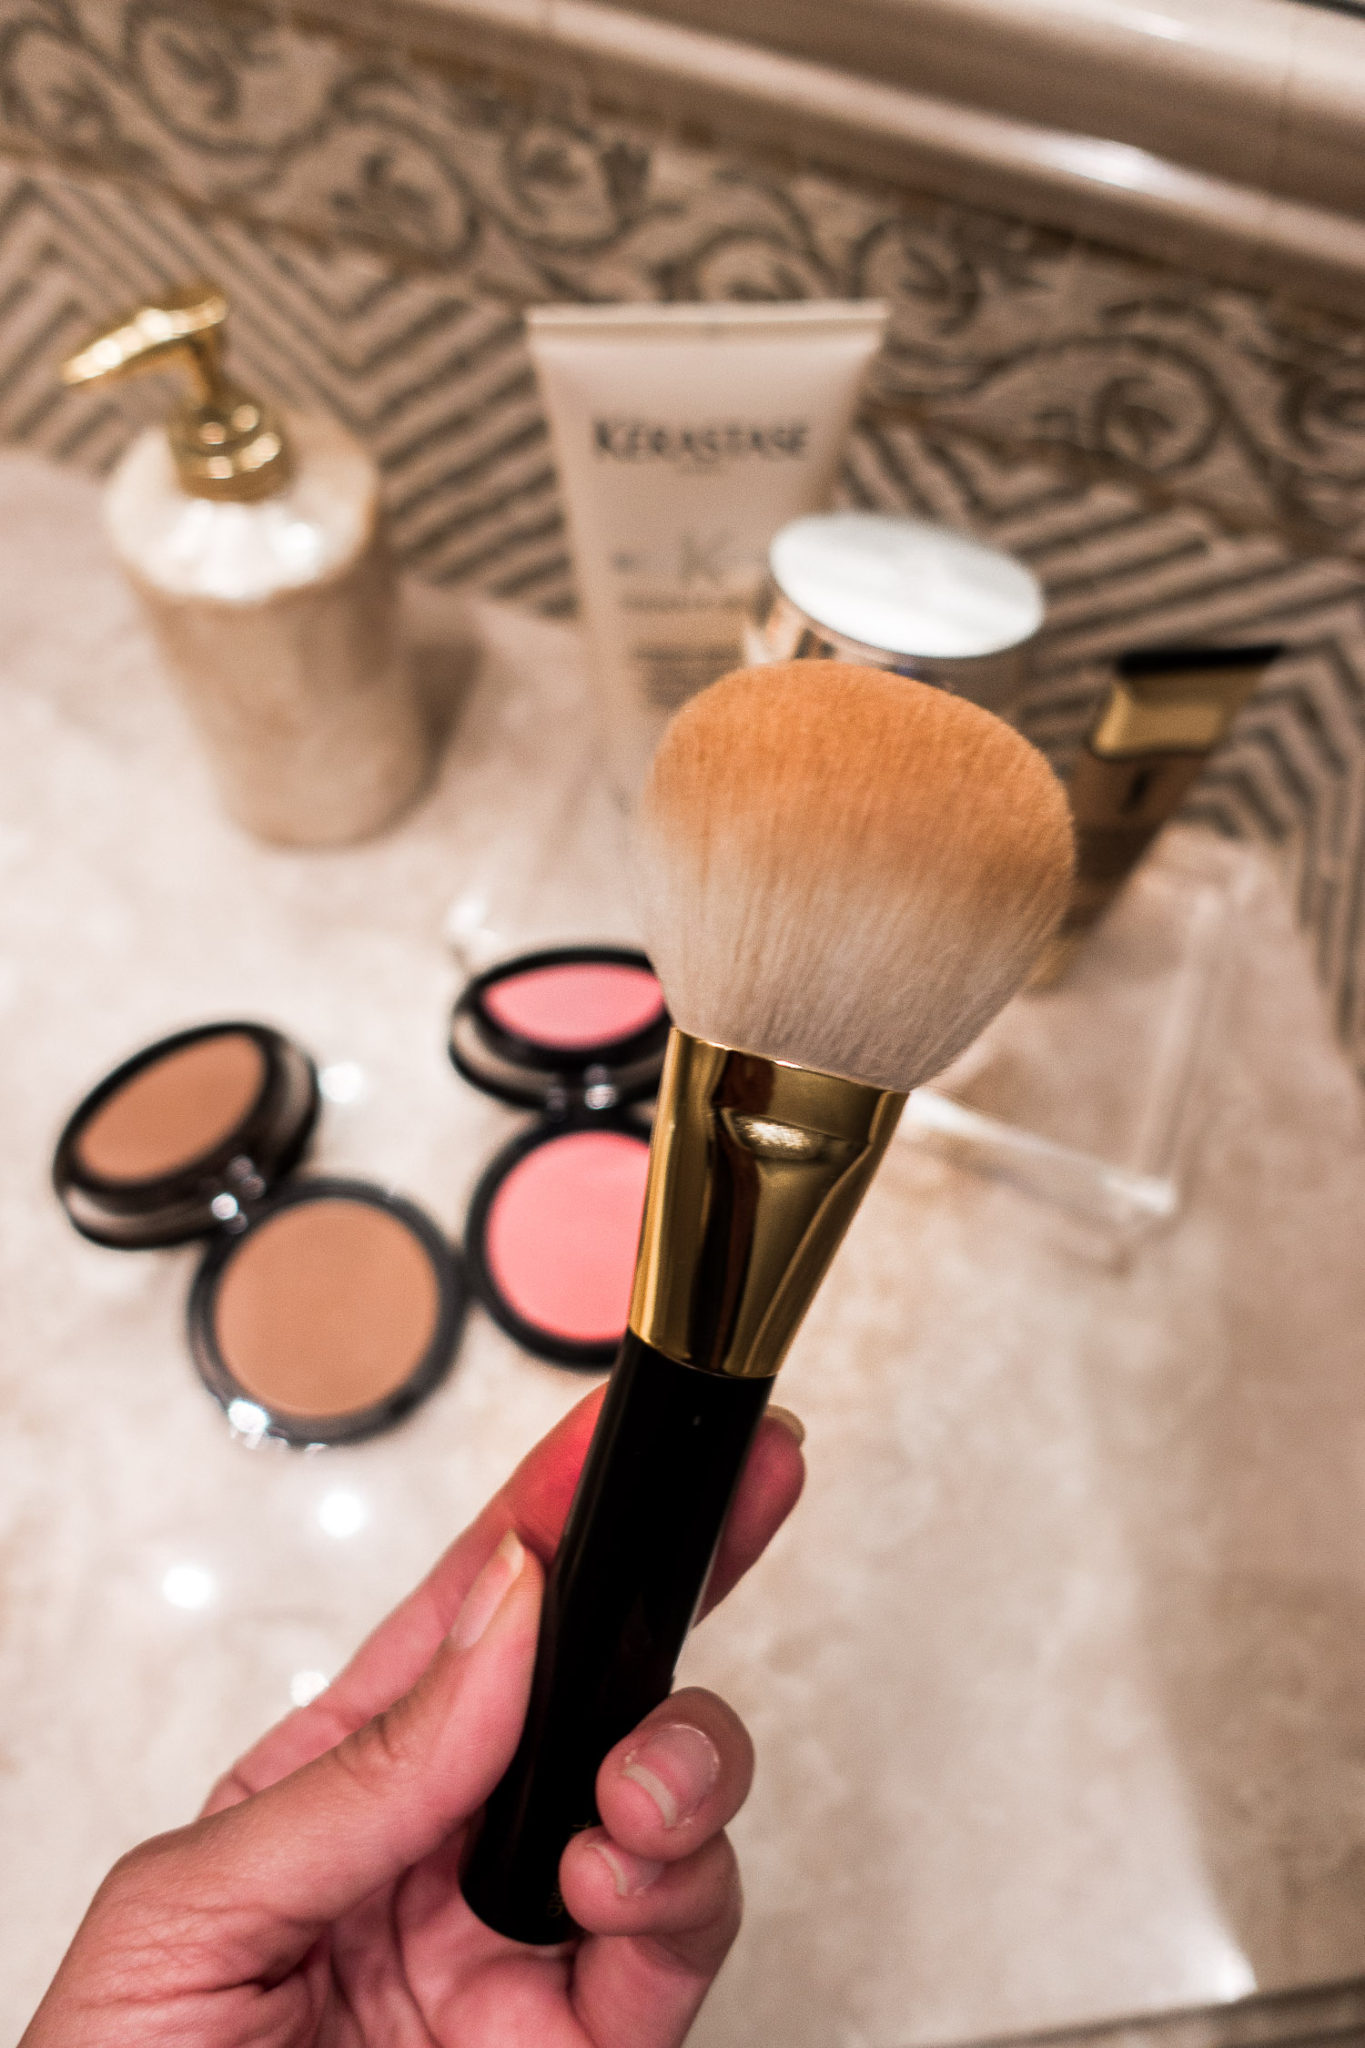 Tom Ford bronzer brush review by Amanda of A Glam Lifestyle for her July beauty faves